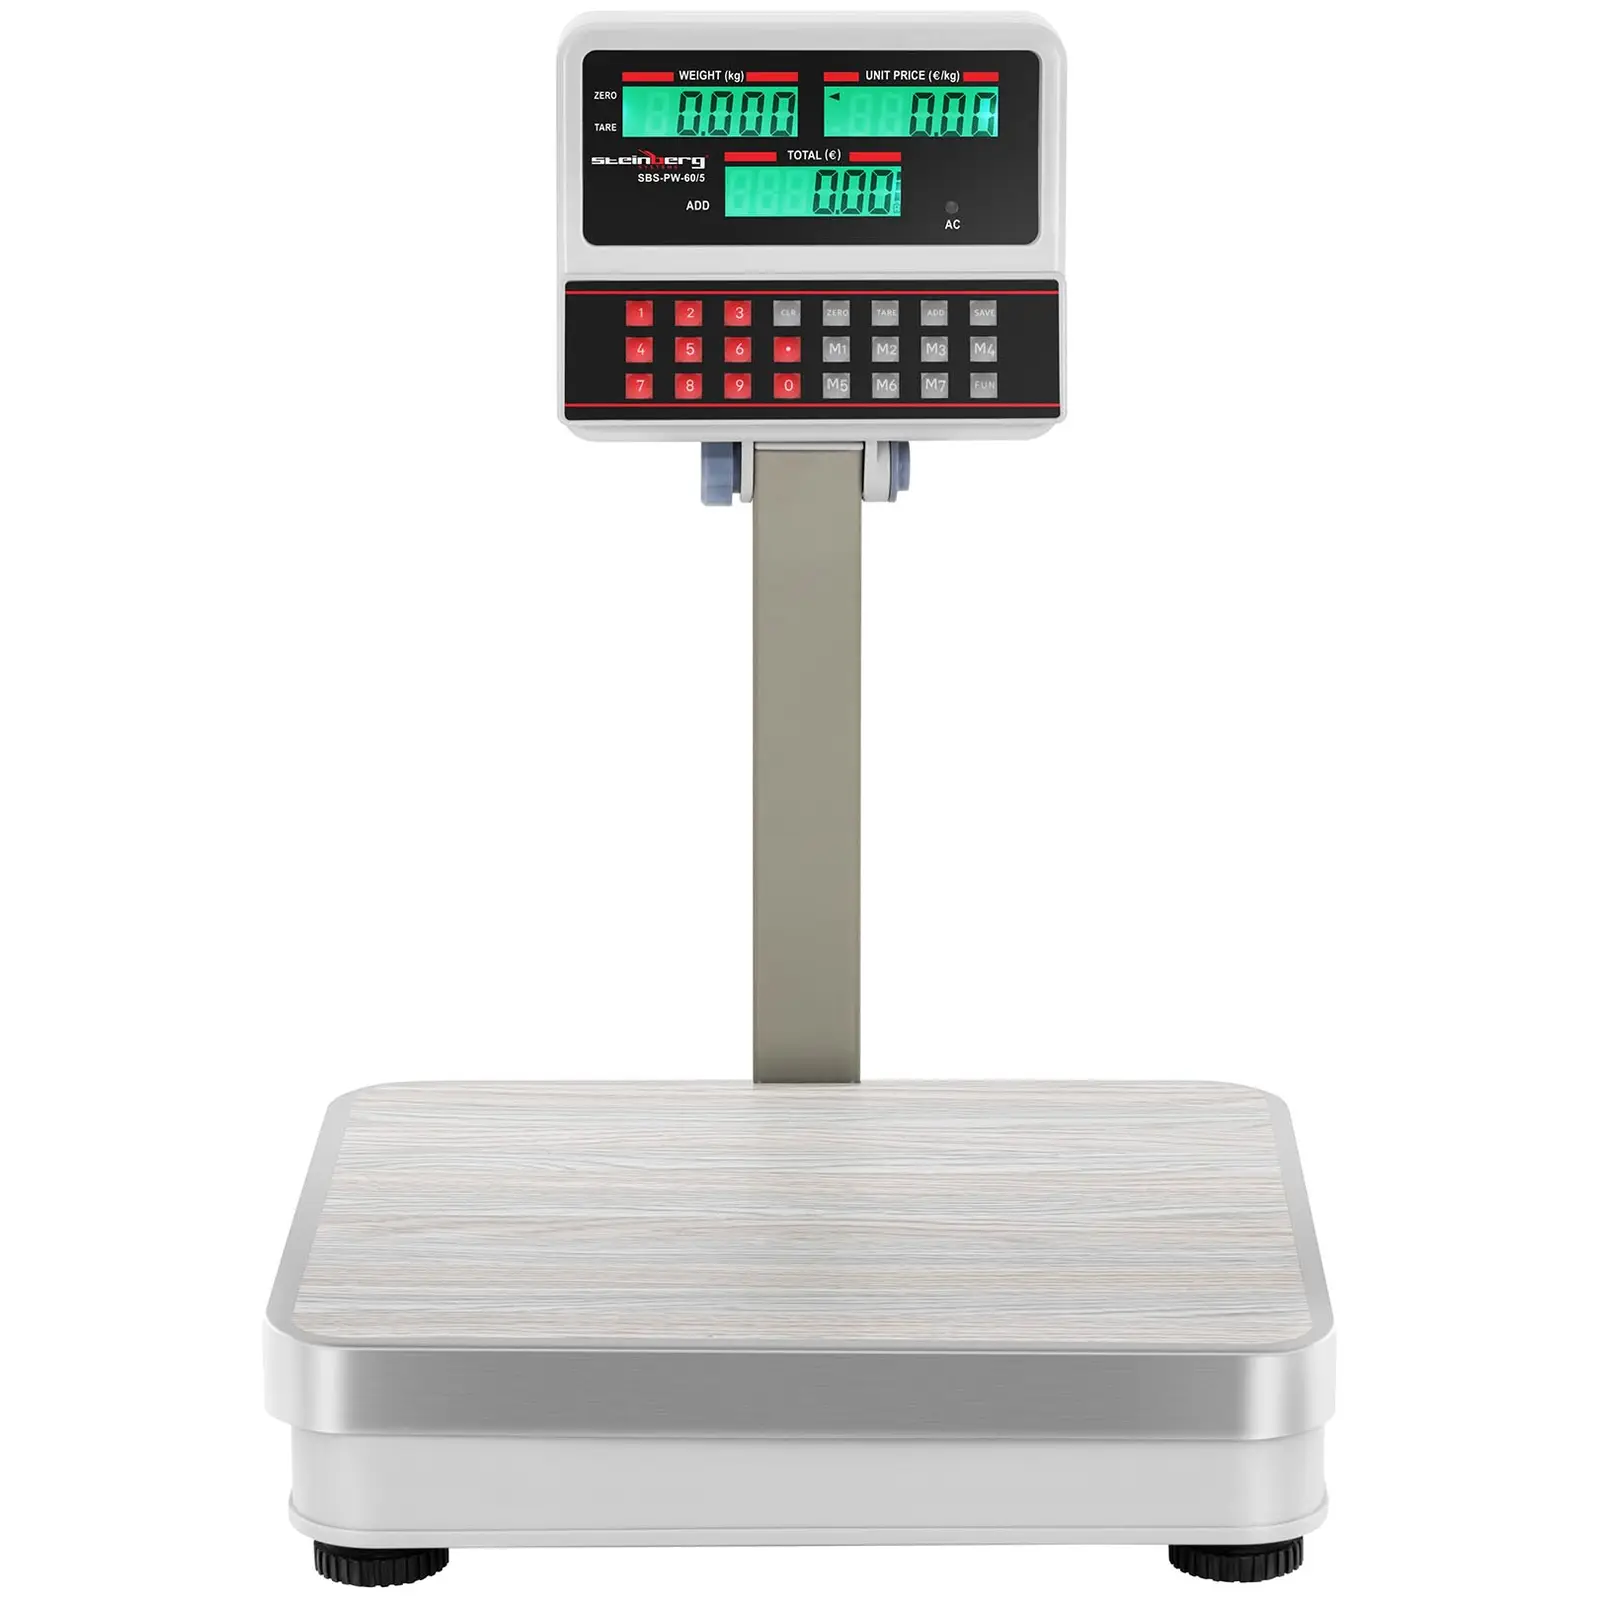 Digital Weighing Scale with Raised LCD Display - 60 kg / 5 g